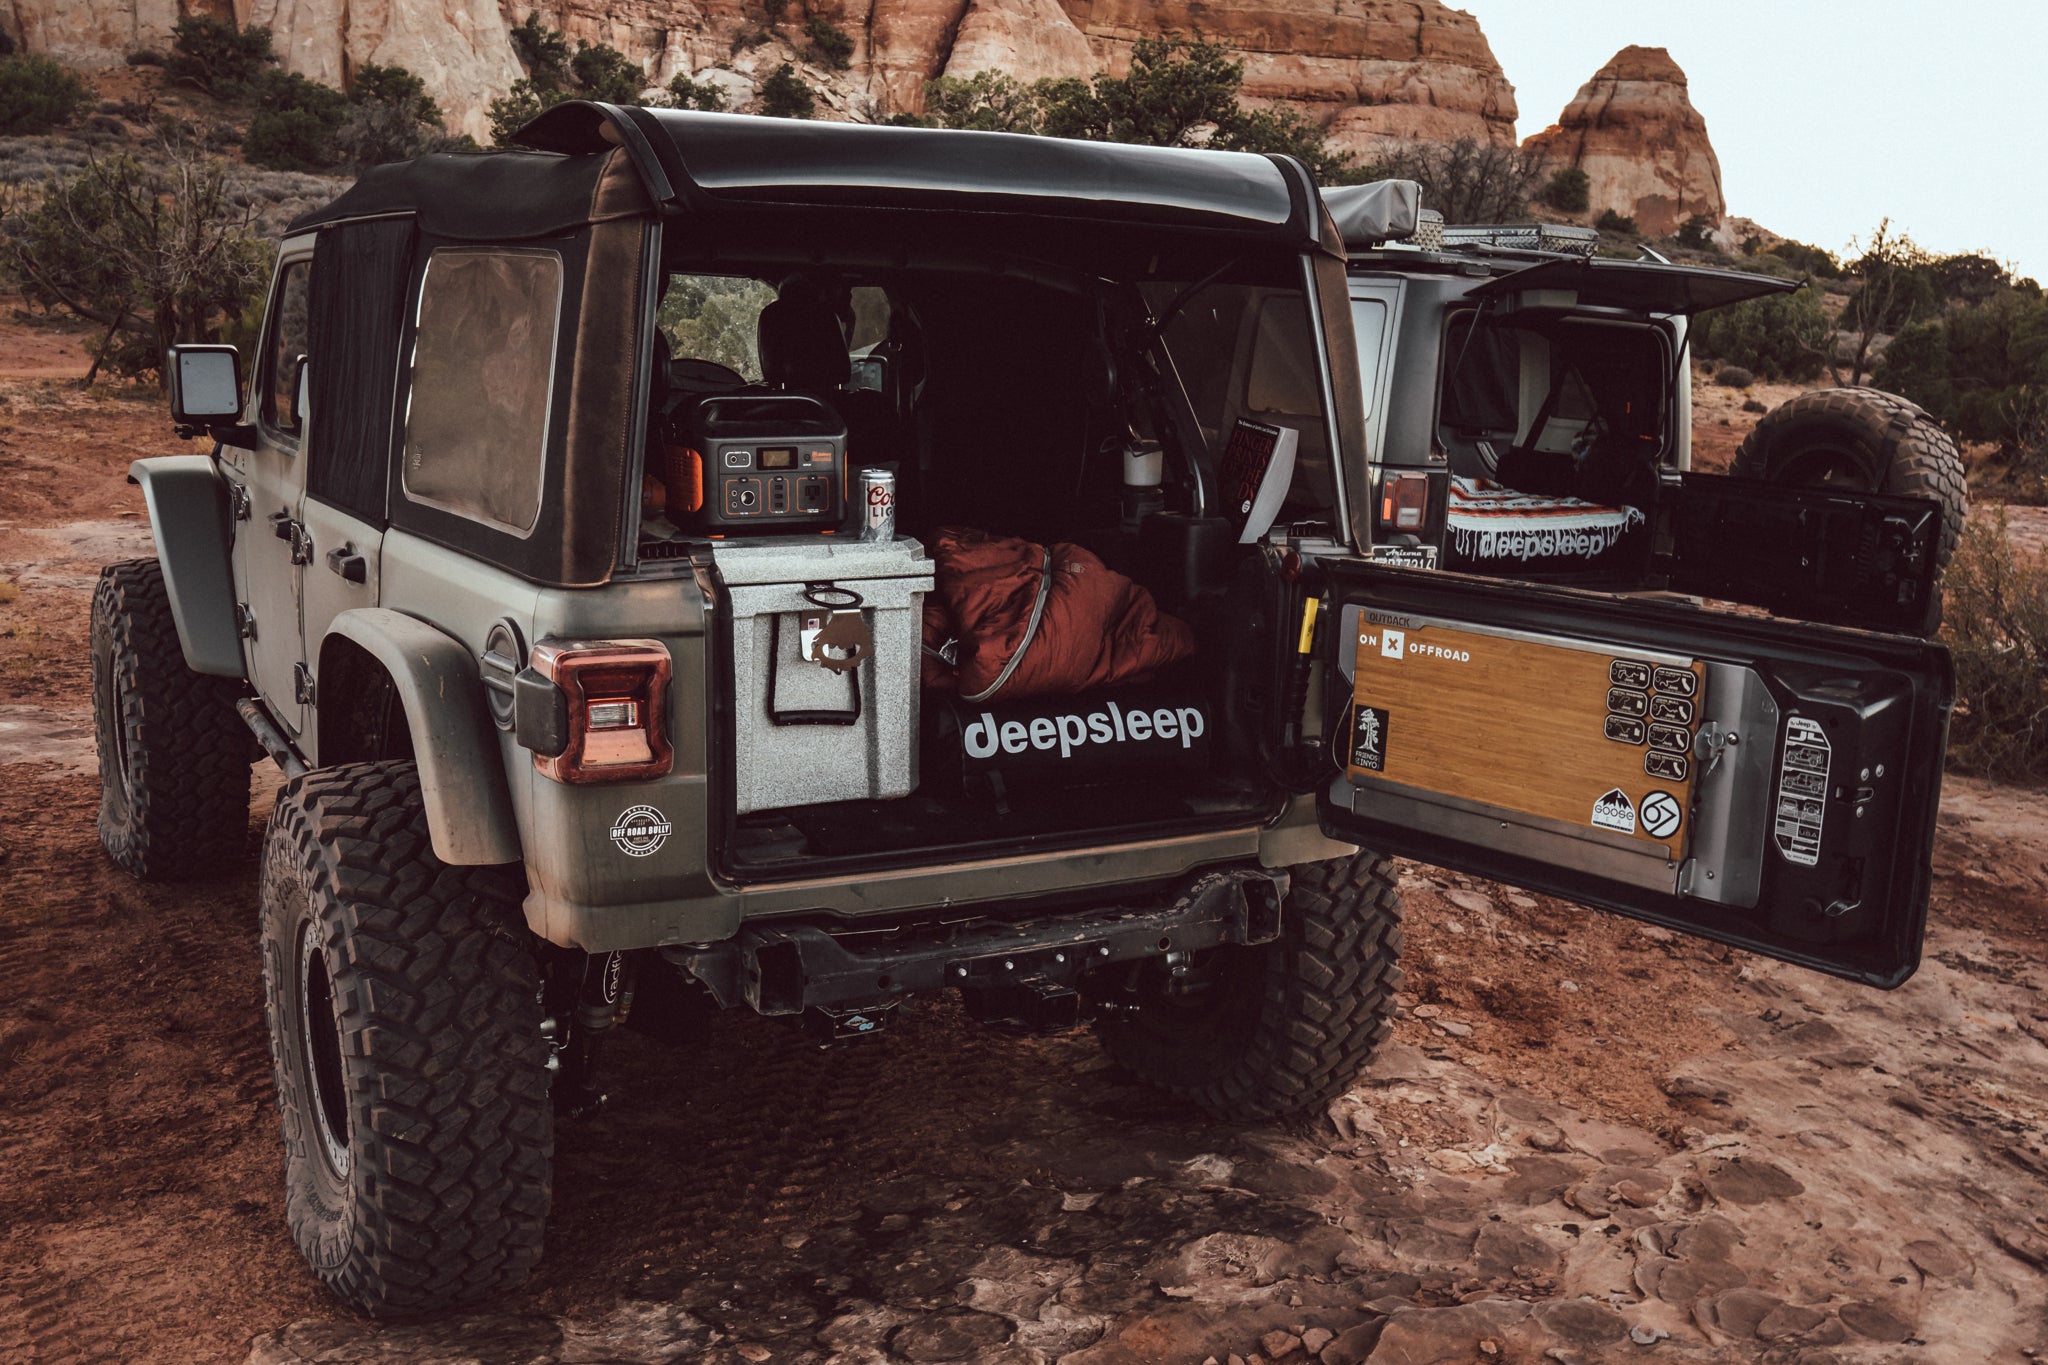 Deepsleep car camping mattress with overland camping gear in the back of a 4-door Jeep in the desert surrounded by rugged mountains.